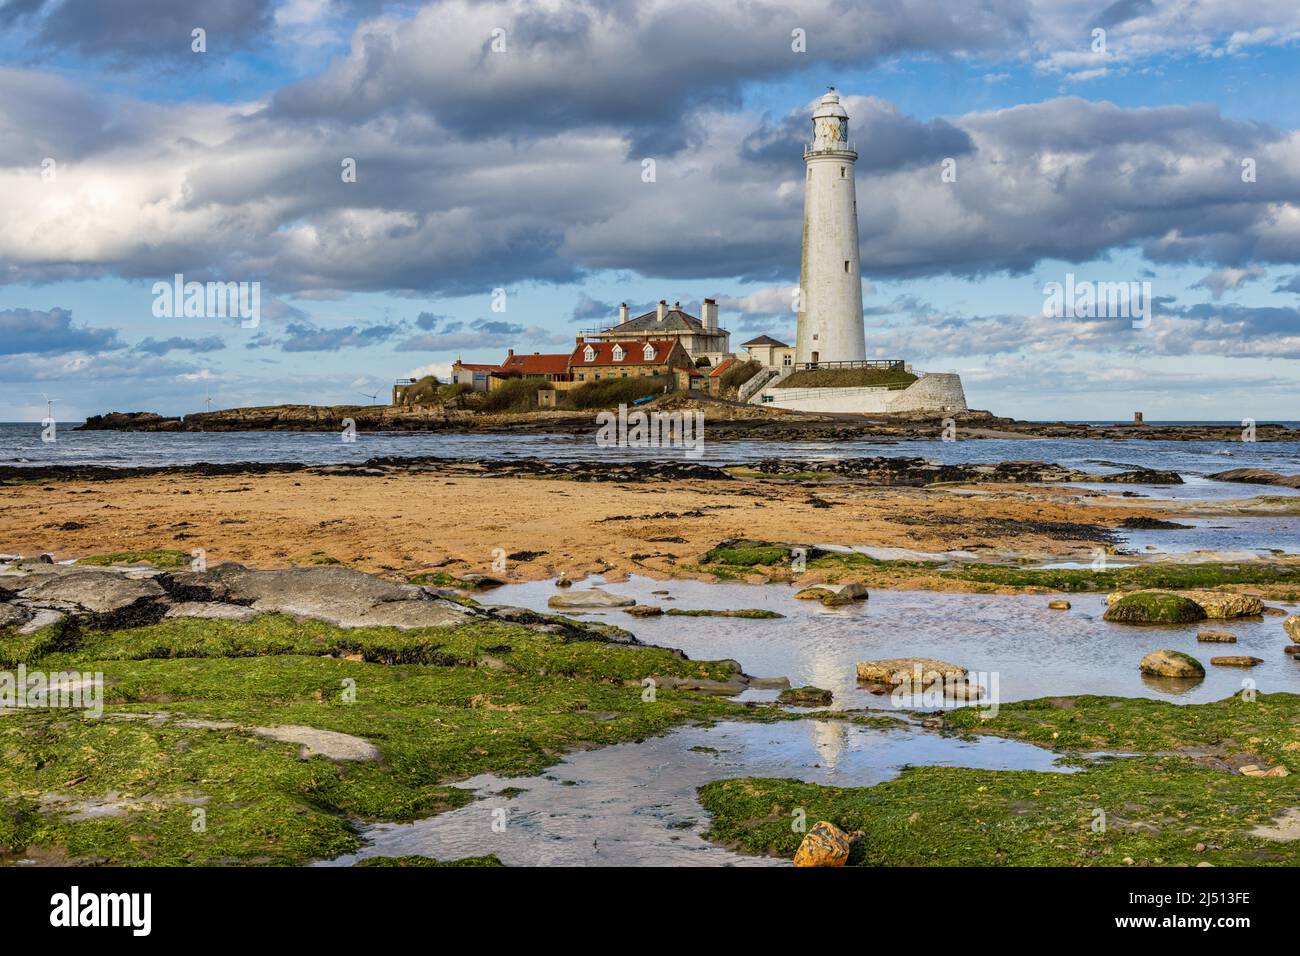 St. Mary's Lighthouse at Whitley Bay, North Tyneside, Uk. The Lighthouse is a grade II listed building Stock Photo